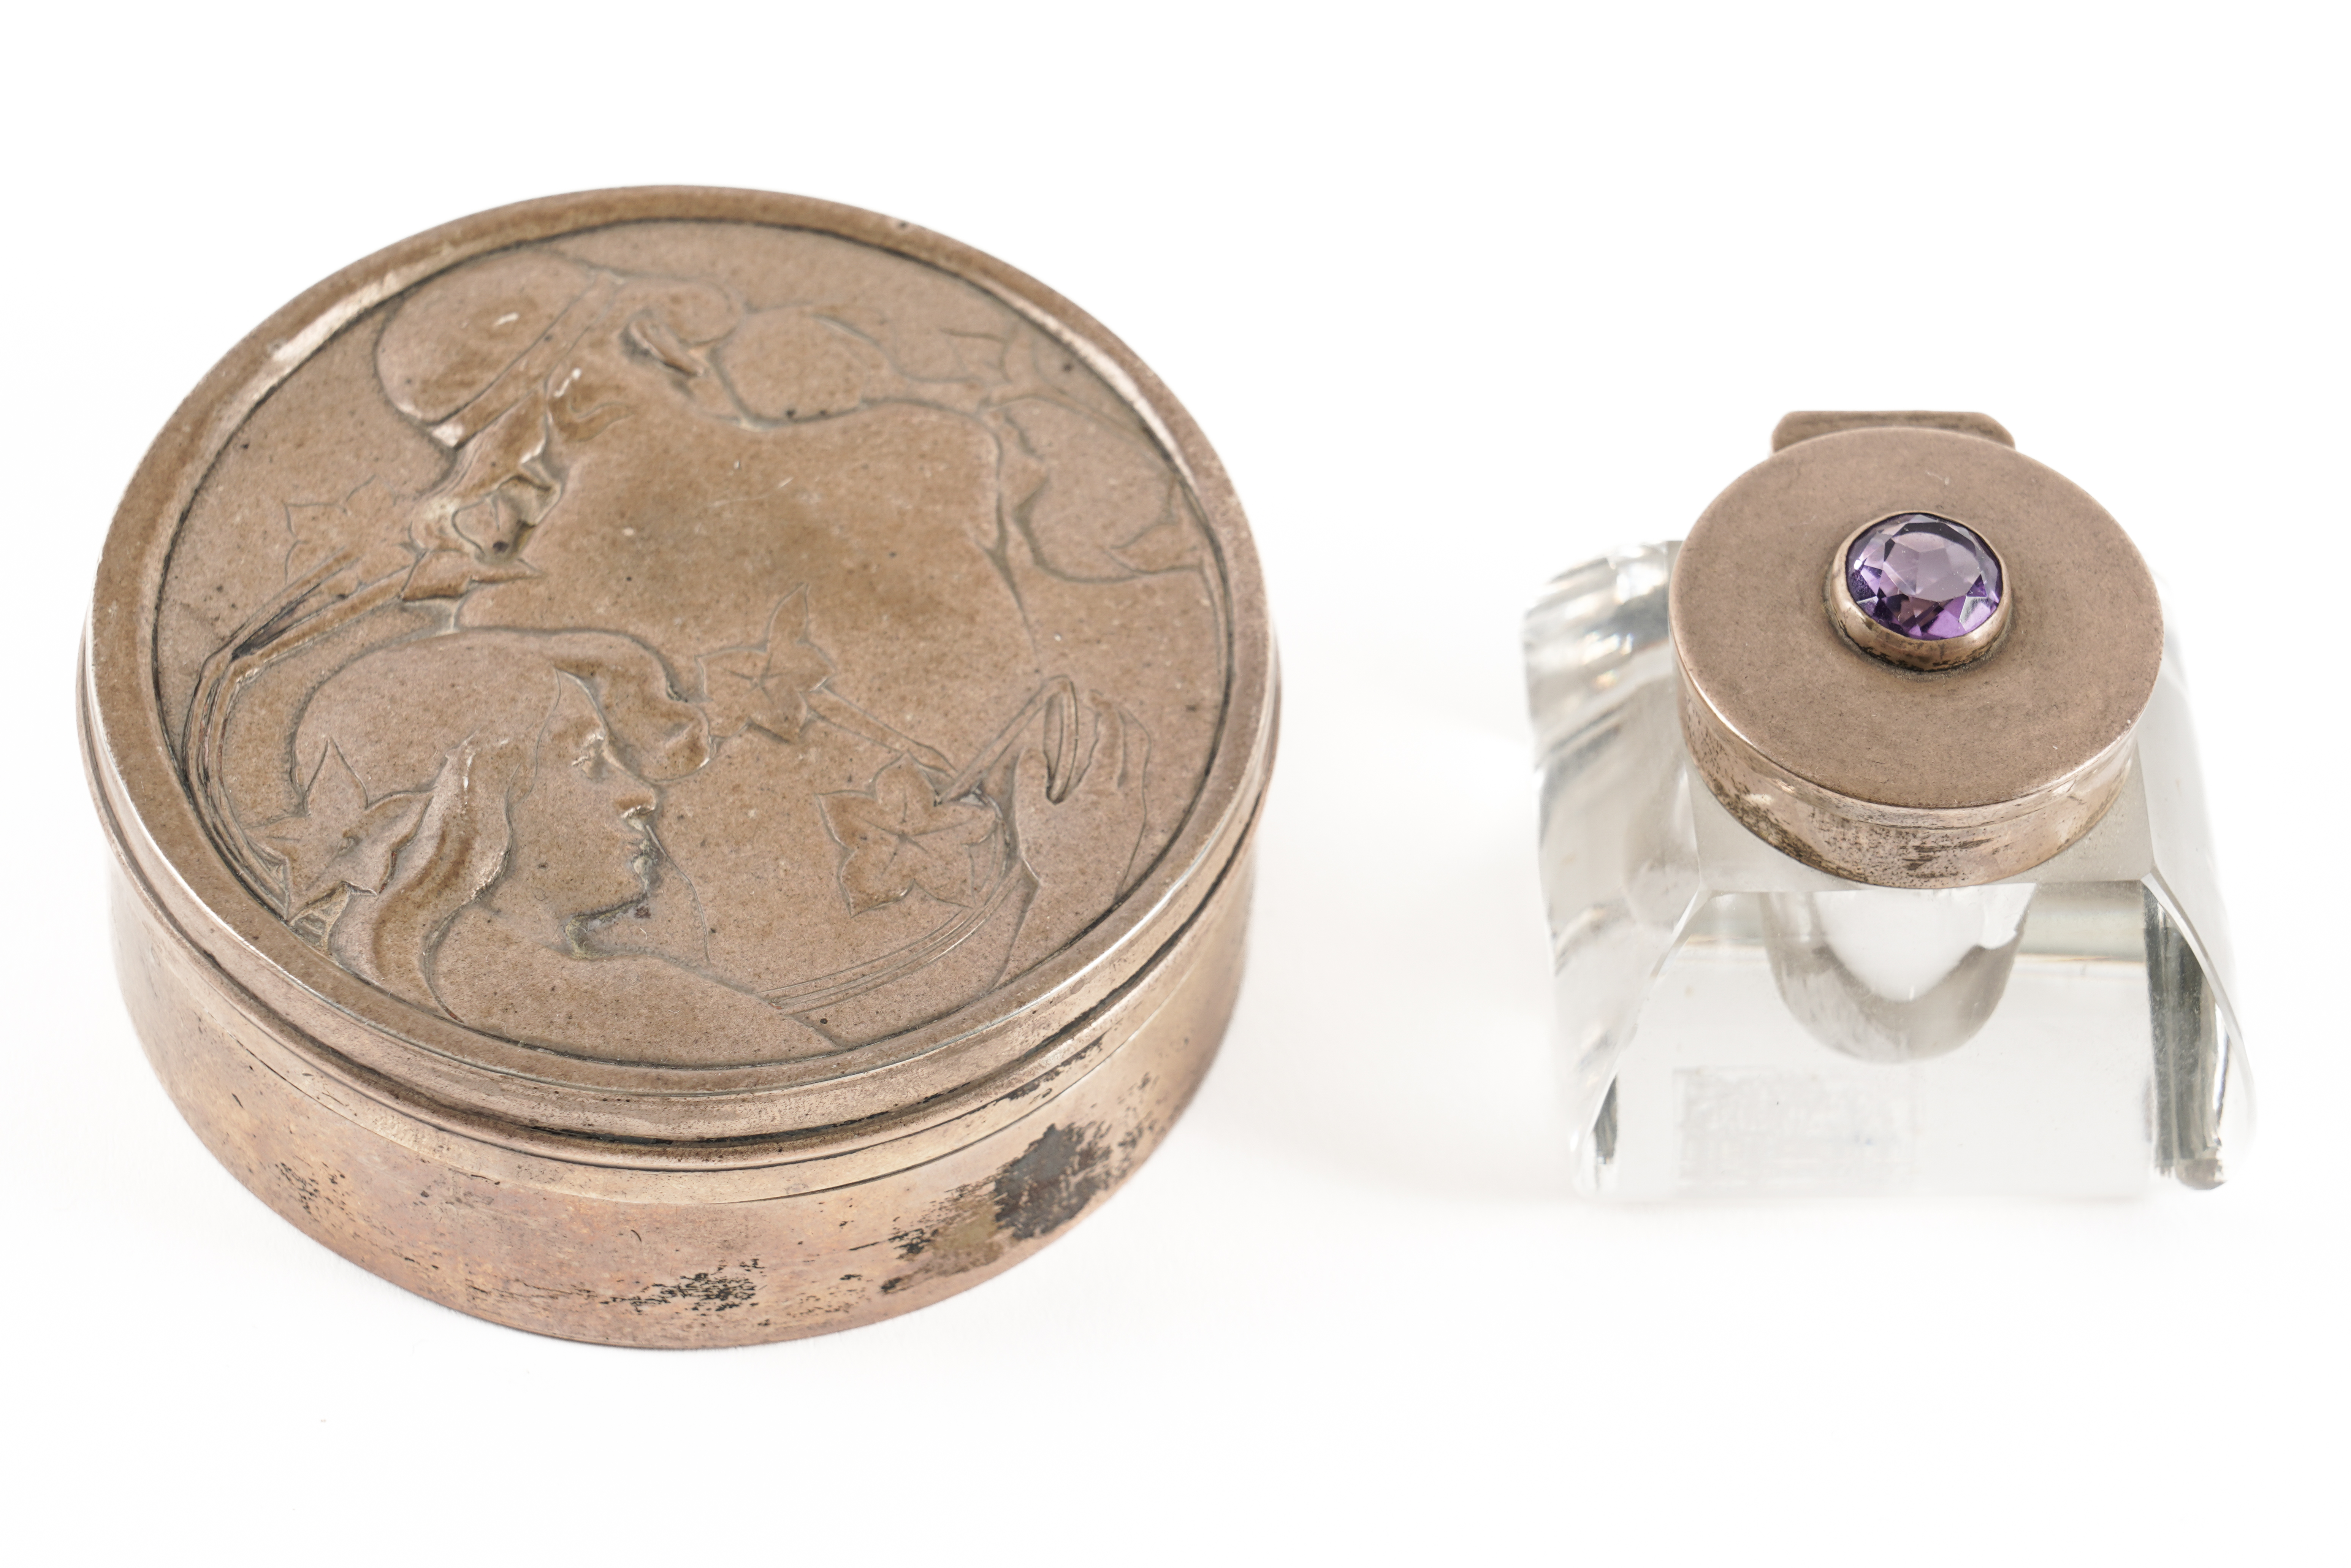 A SILVER TRINKET BOX AND AN INKWELL (2)